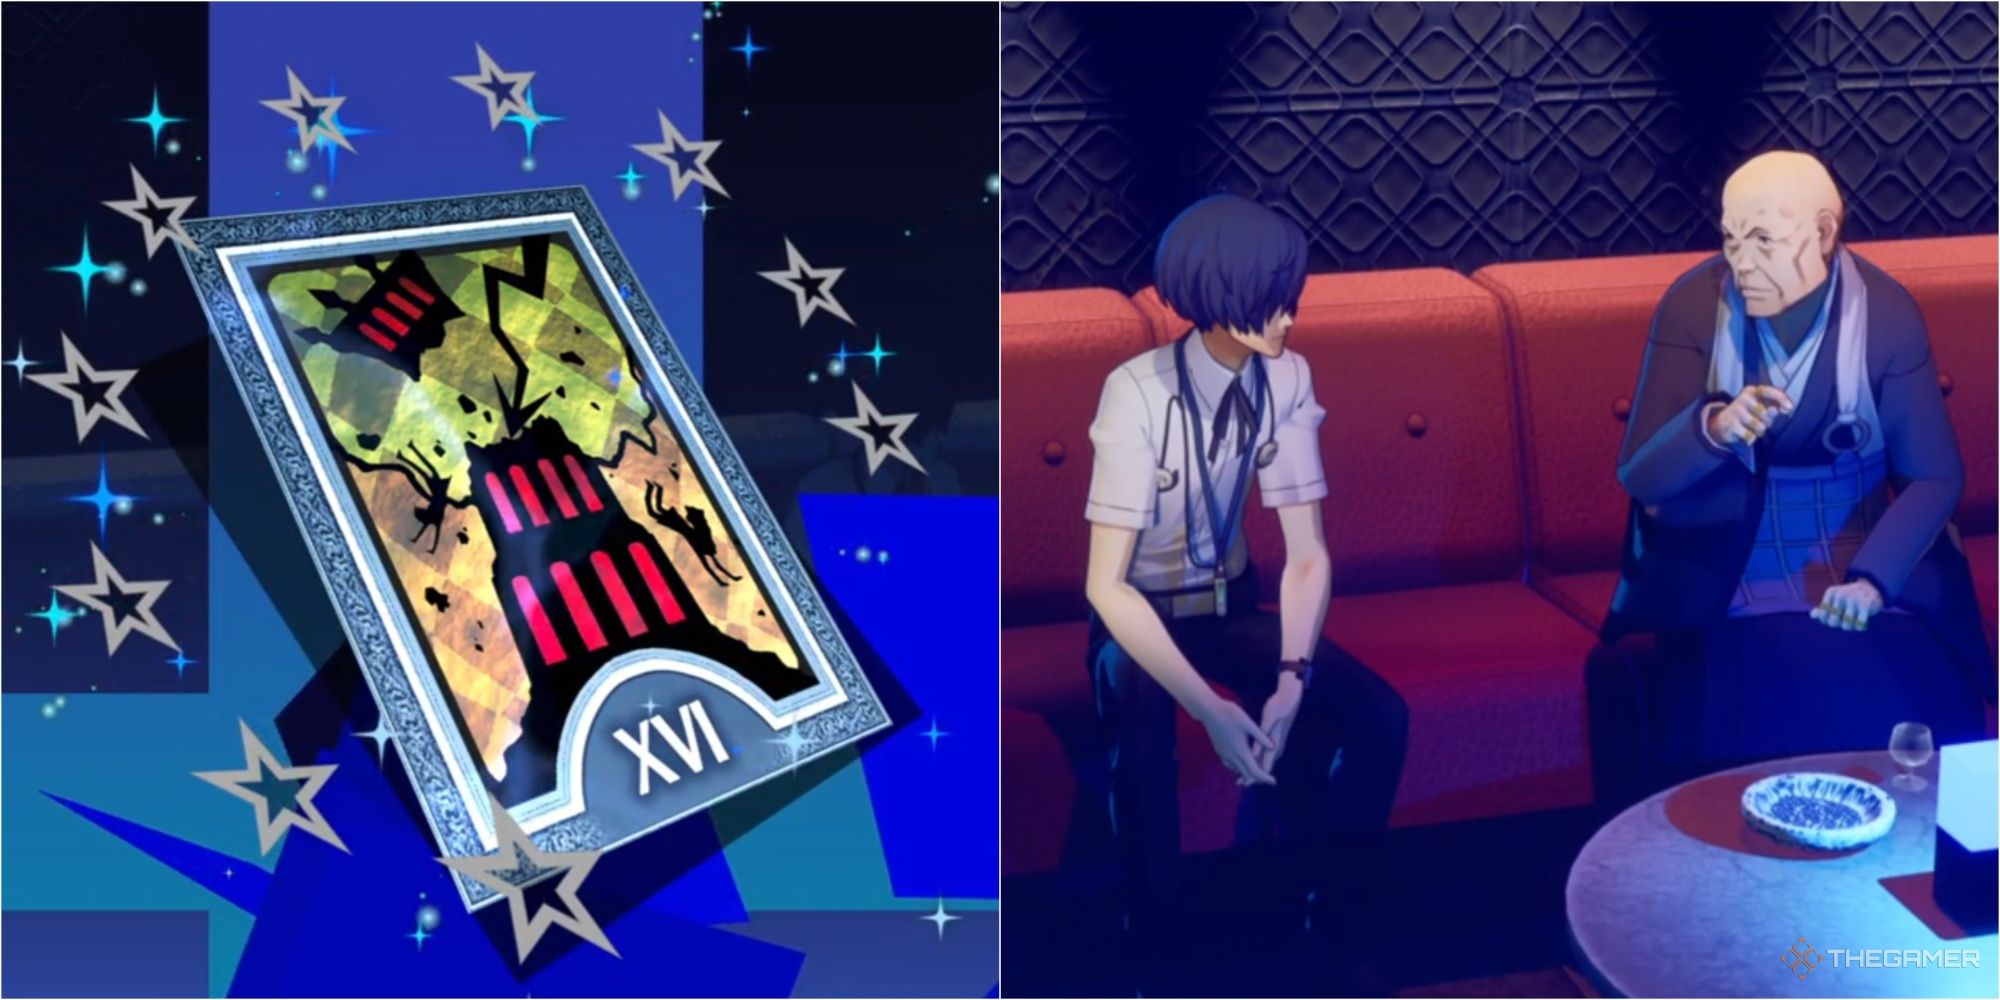 the tower social link tarot card and the protagonist with mutatsu at club escapade persona 3 reload p3r